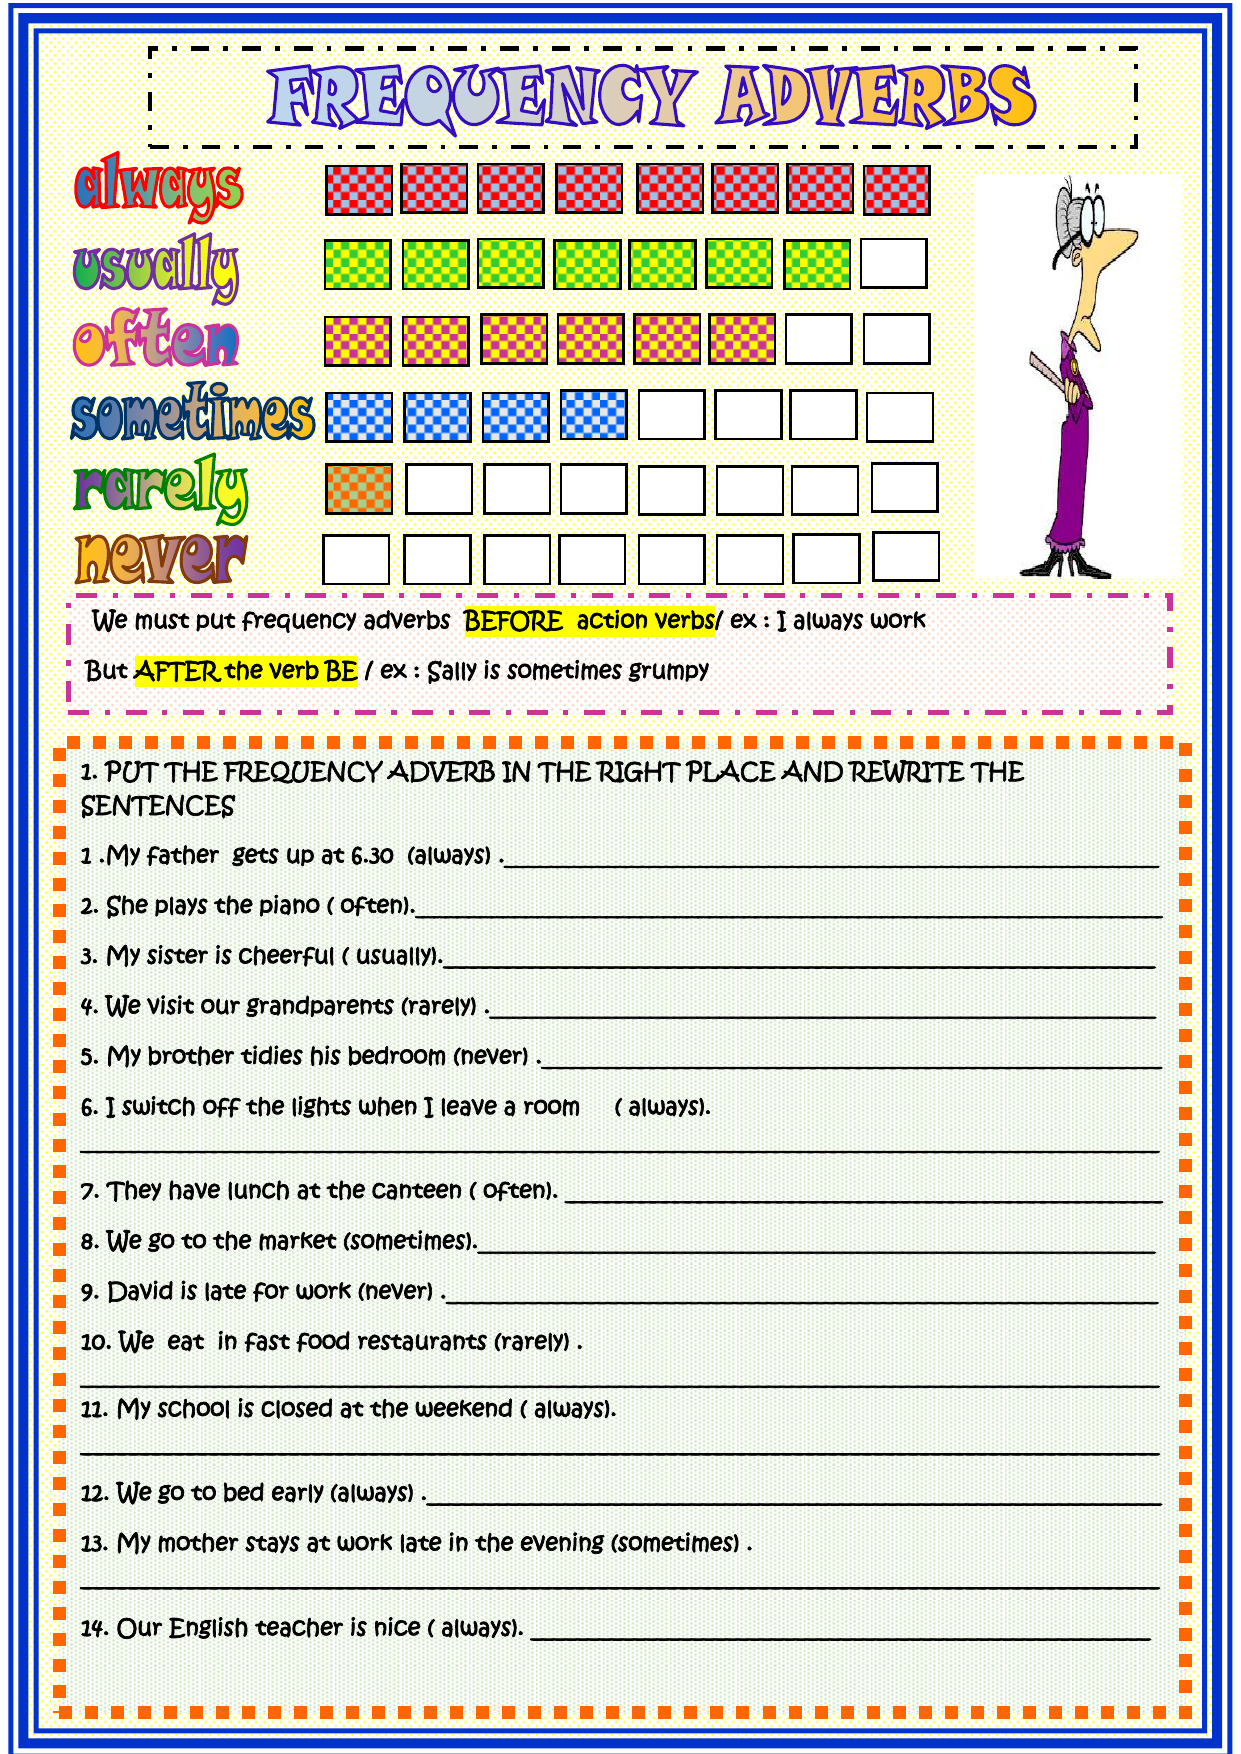 adverbs-of-frequency-worksheet-1